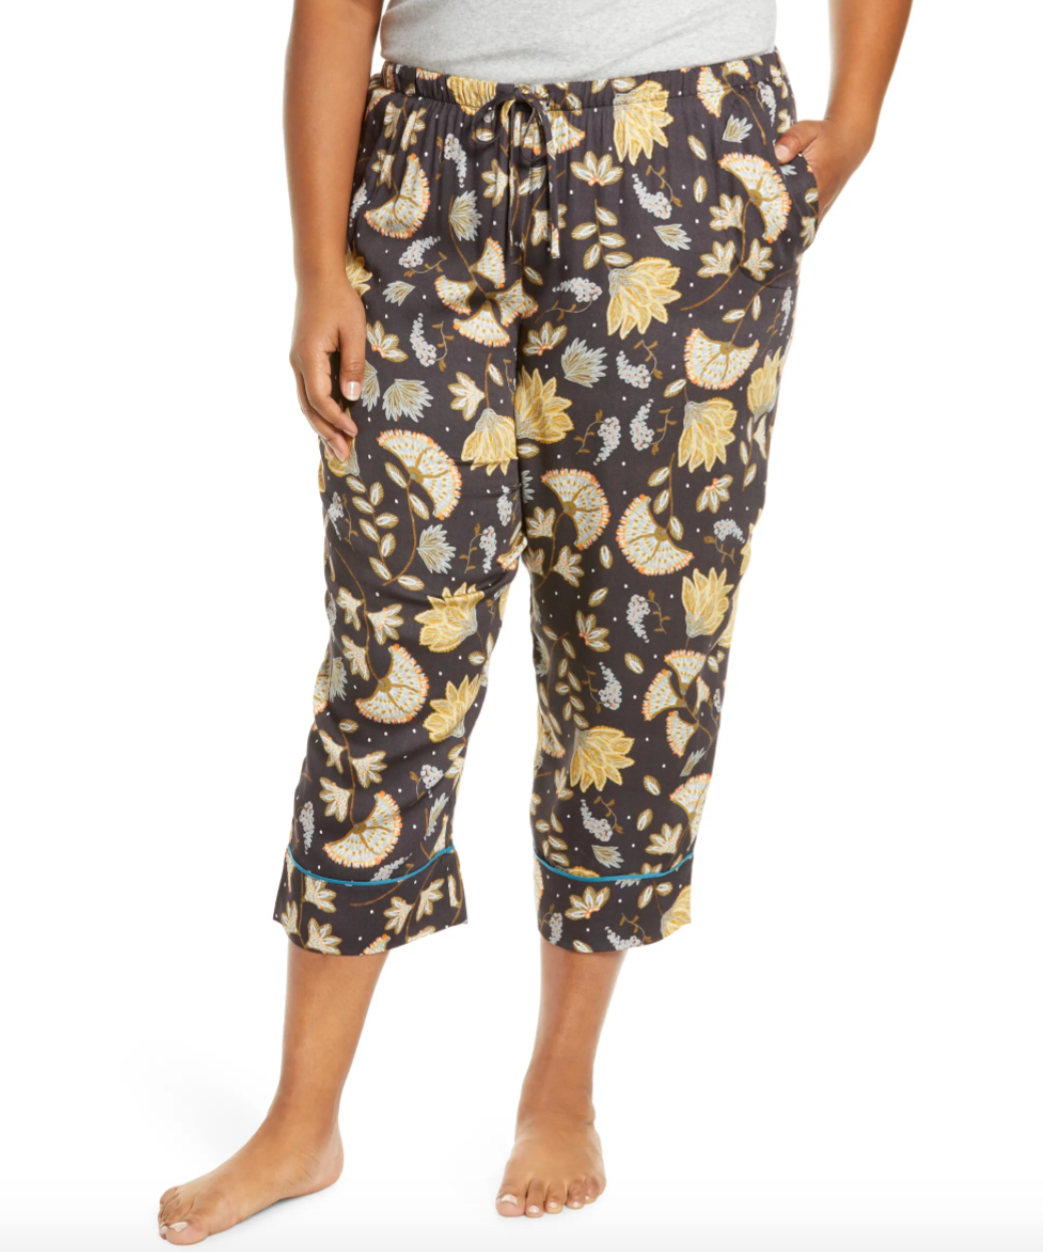 Refinery29 Launches New Sleepwear and Loungewear Styles